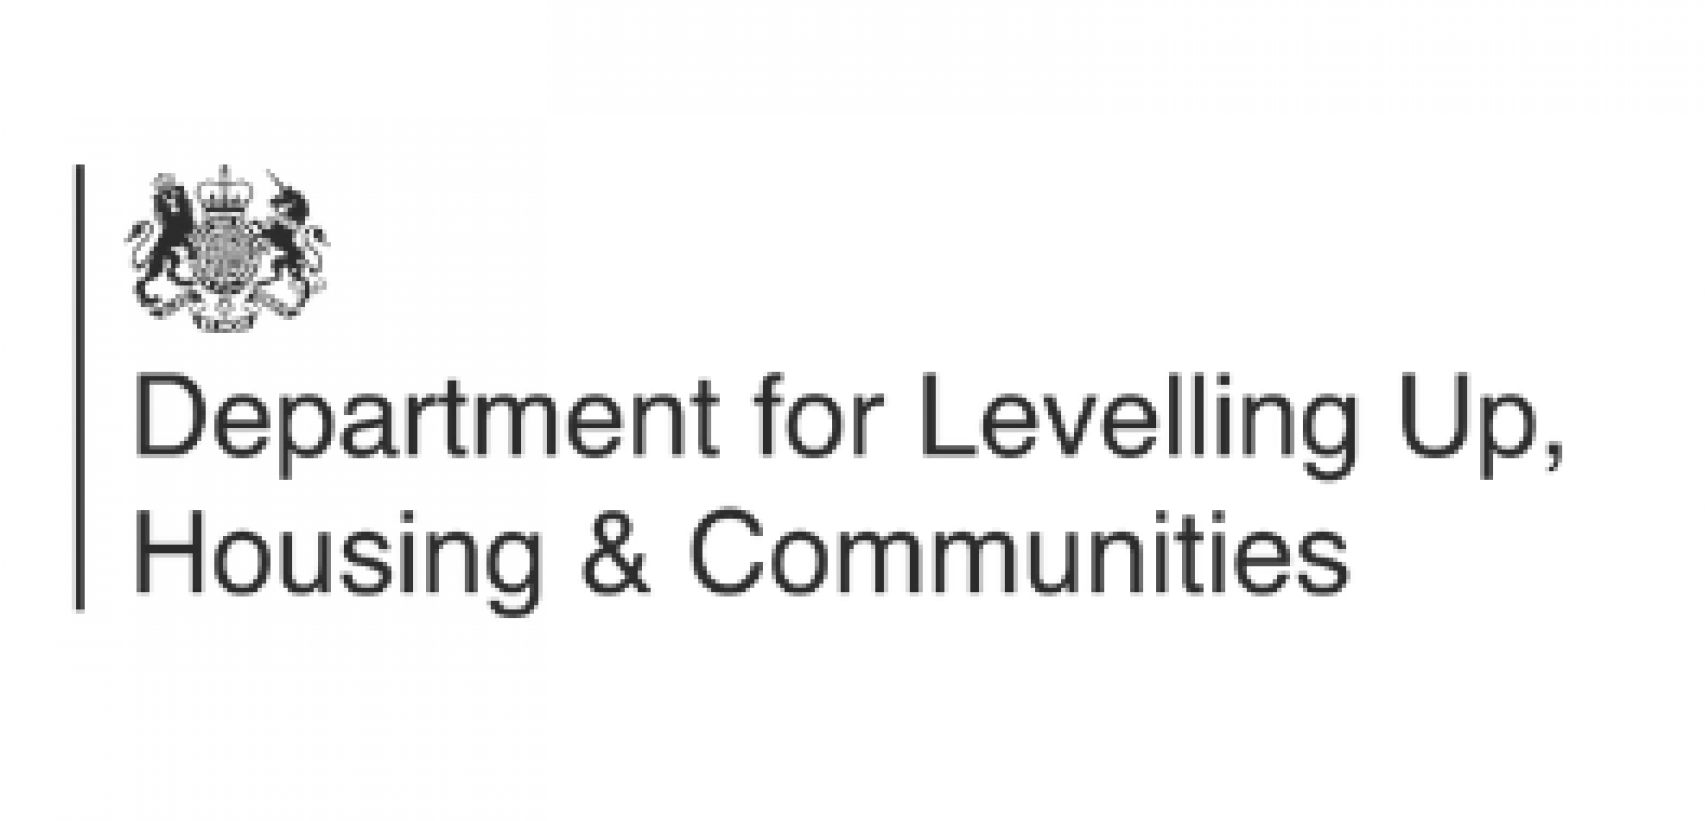 Department for levelling up, Housing and Communities logo